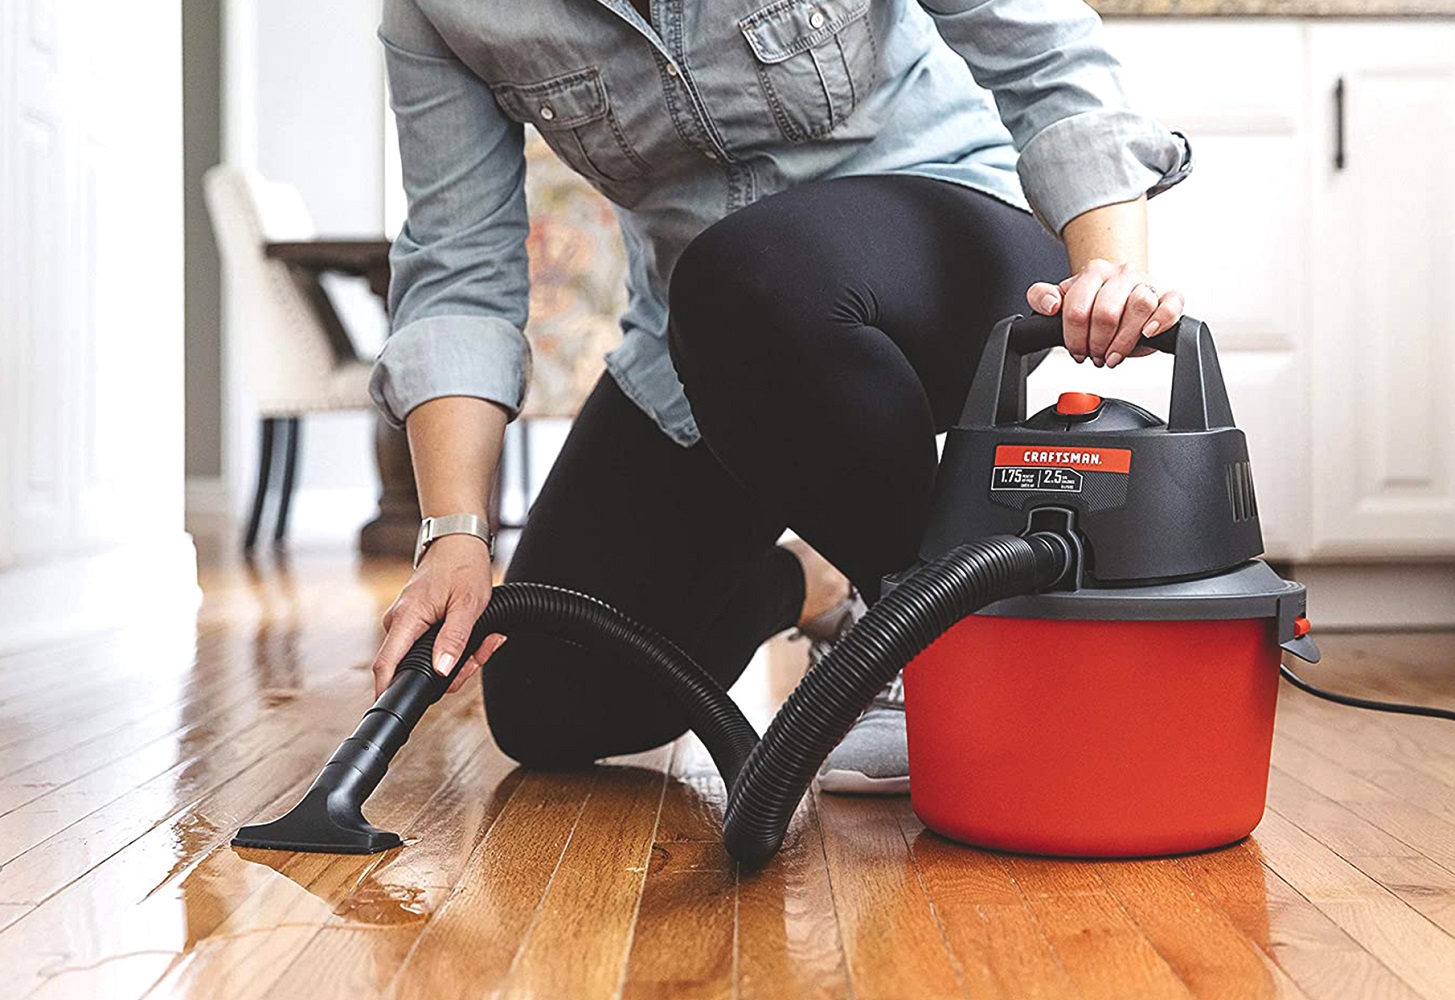 4 Best Wet/Dry Vacuums for December 2022 | Check Reviews